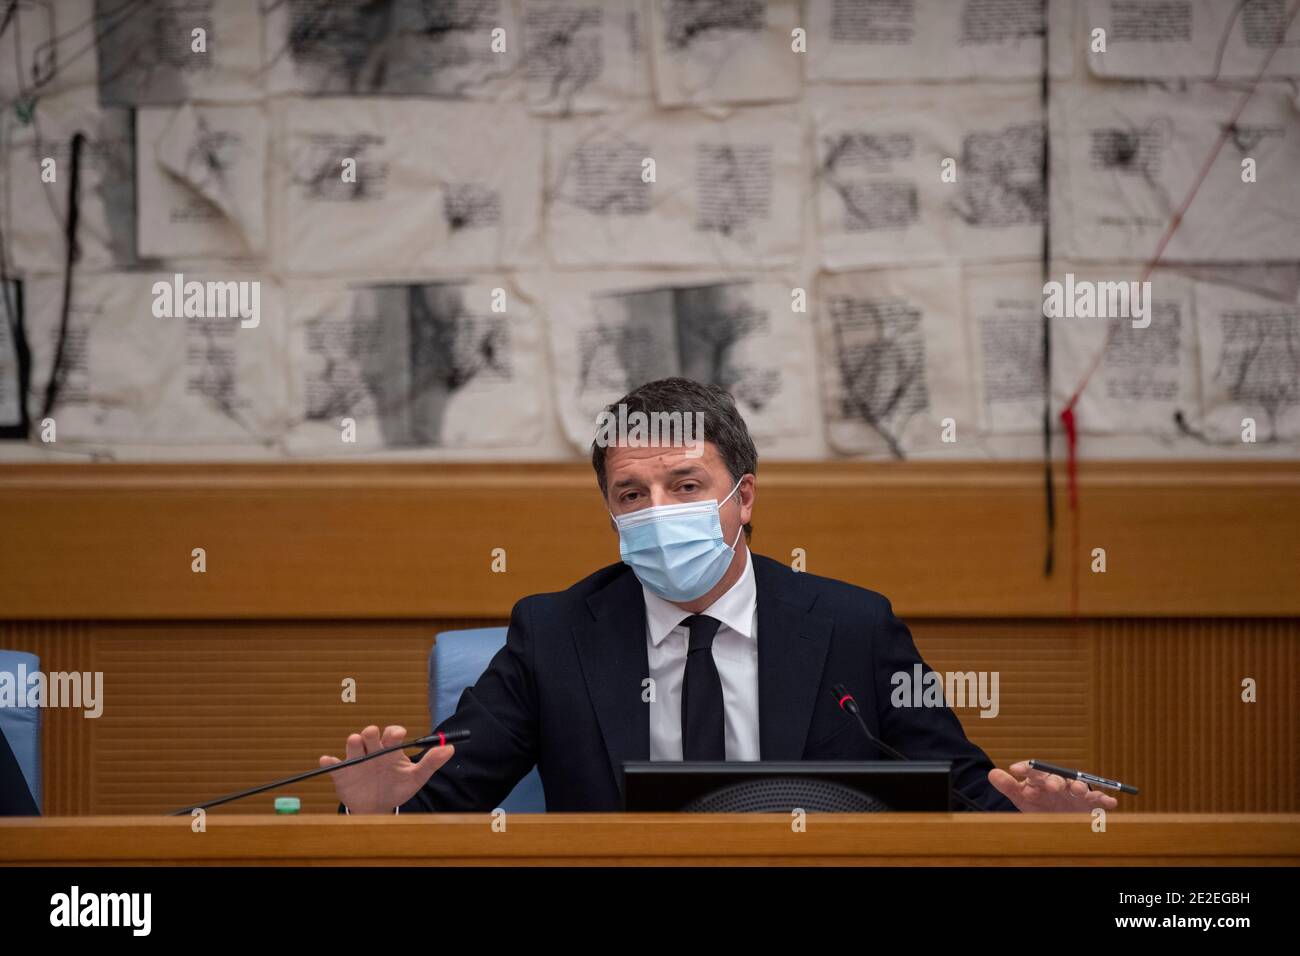 (210113) -- ROME, Jan. 13, 2021 (Xinhua) -- Italian Senator Matteo Renzi speaks during a press conference in Rome, Italy, Jan. 13, 2021. Matteo Renzi, a former prime minister, announced Wednesday that his Italia Viva party is withdrawing its cabinet members from Prime Minister Giuseppe Conte's coalition government. (Pool via Xinhua) Stock Photo